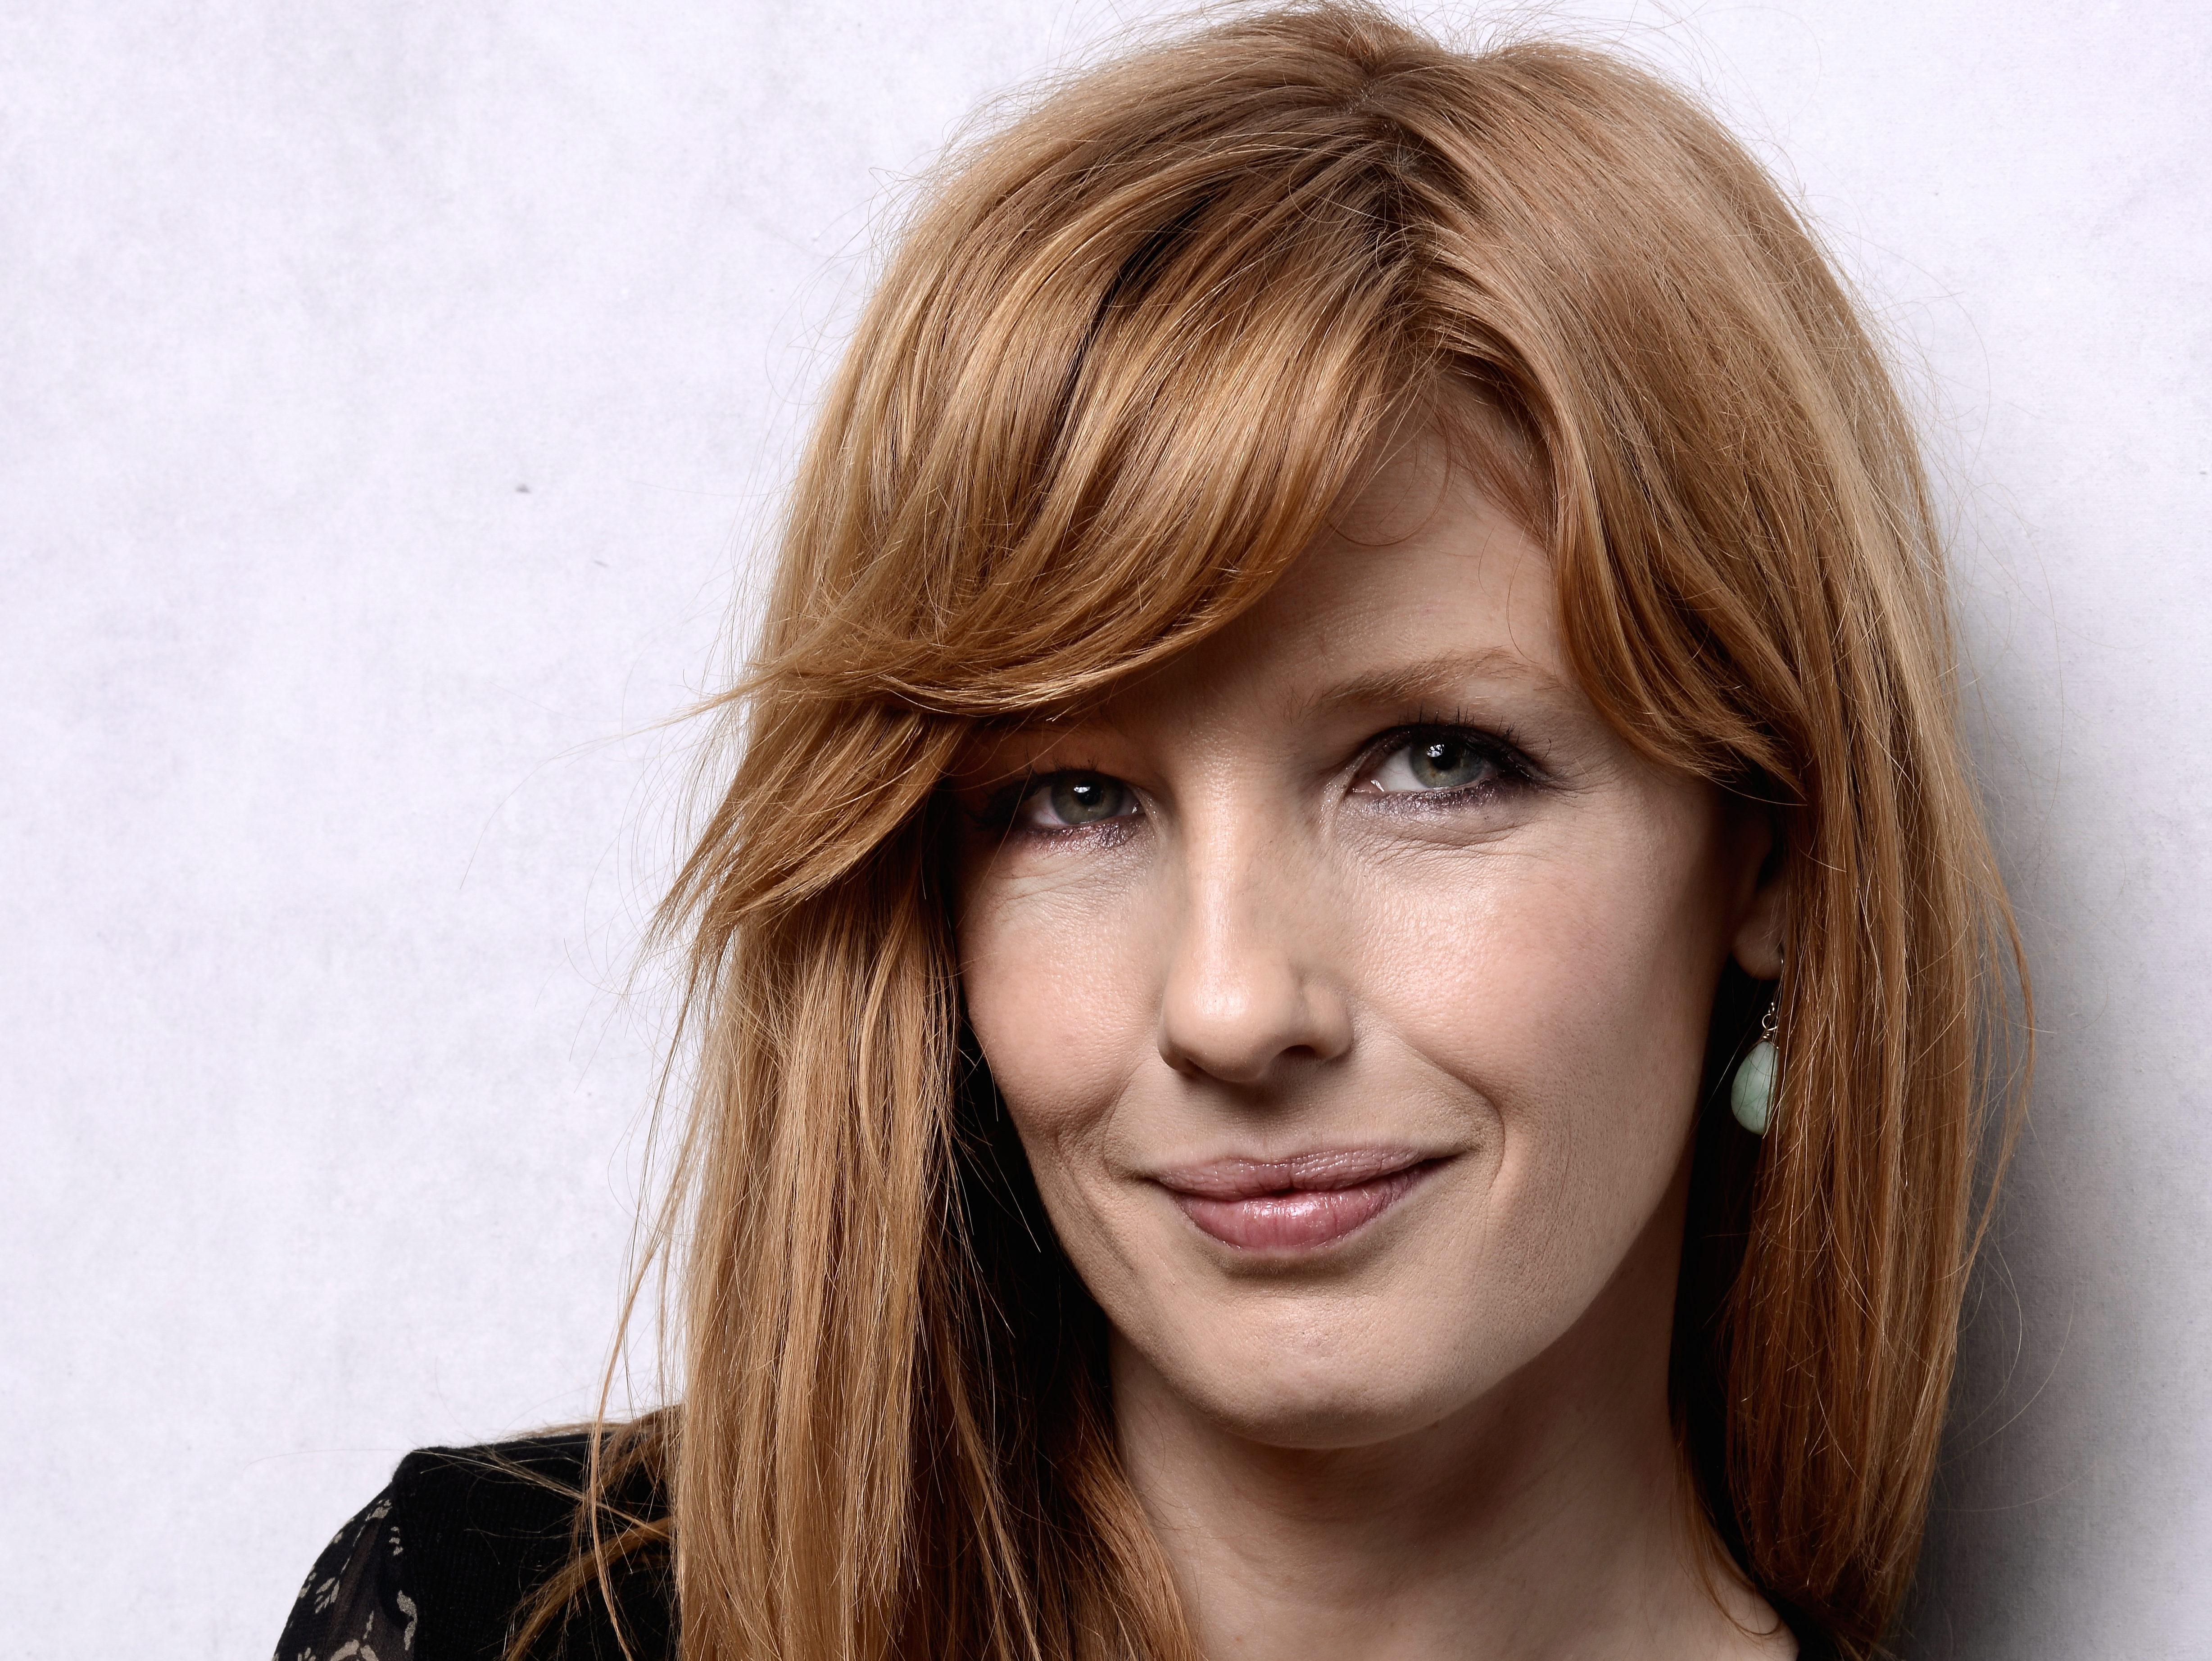 Kelly Reilly Backgrounds, Compatible - PC, Mobile, Gadgets| 4912x3689 px